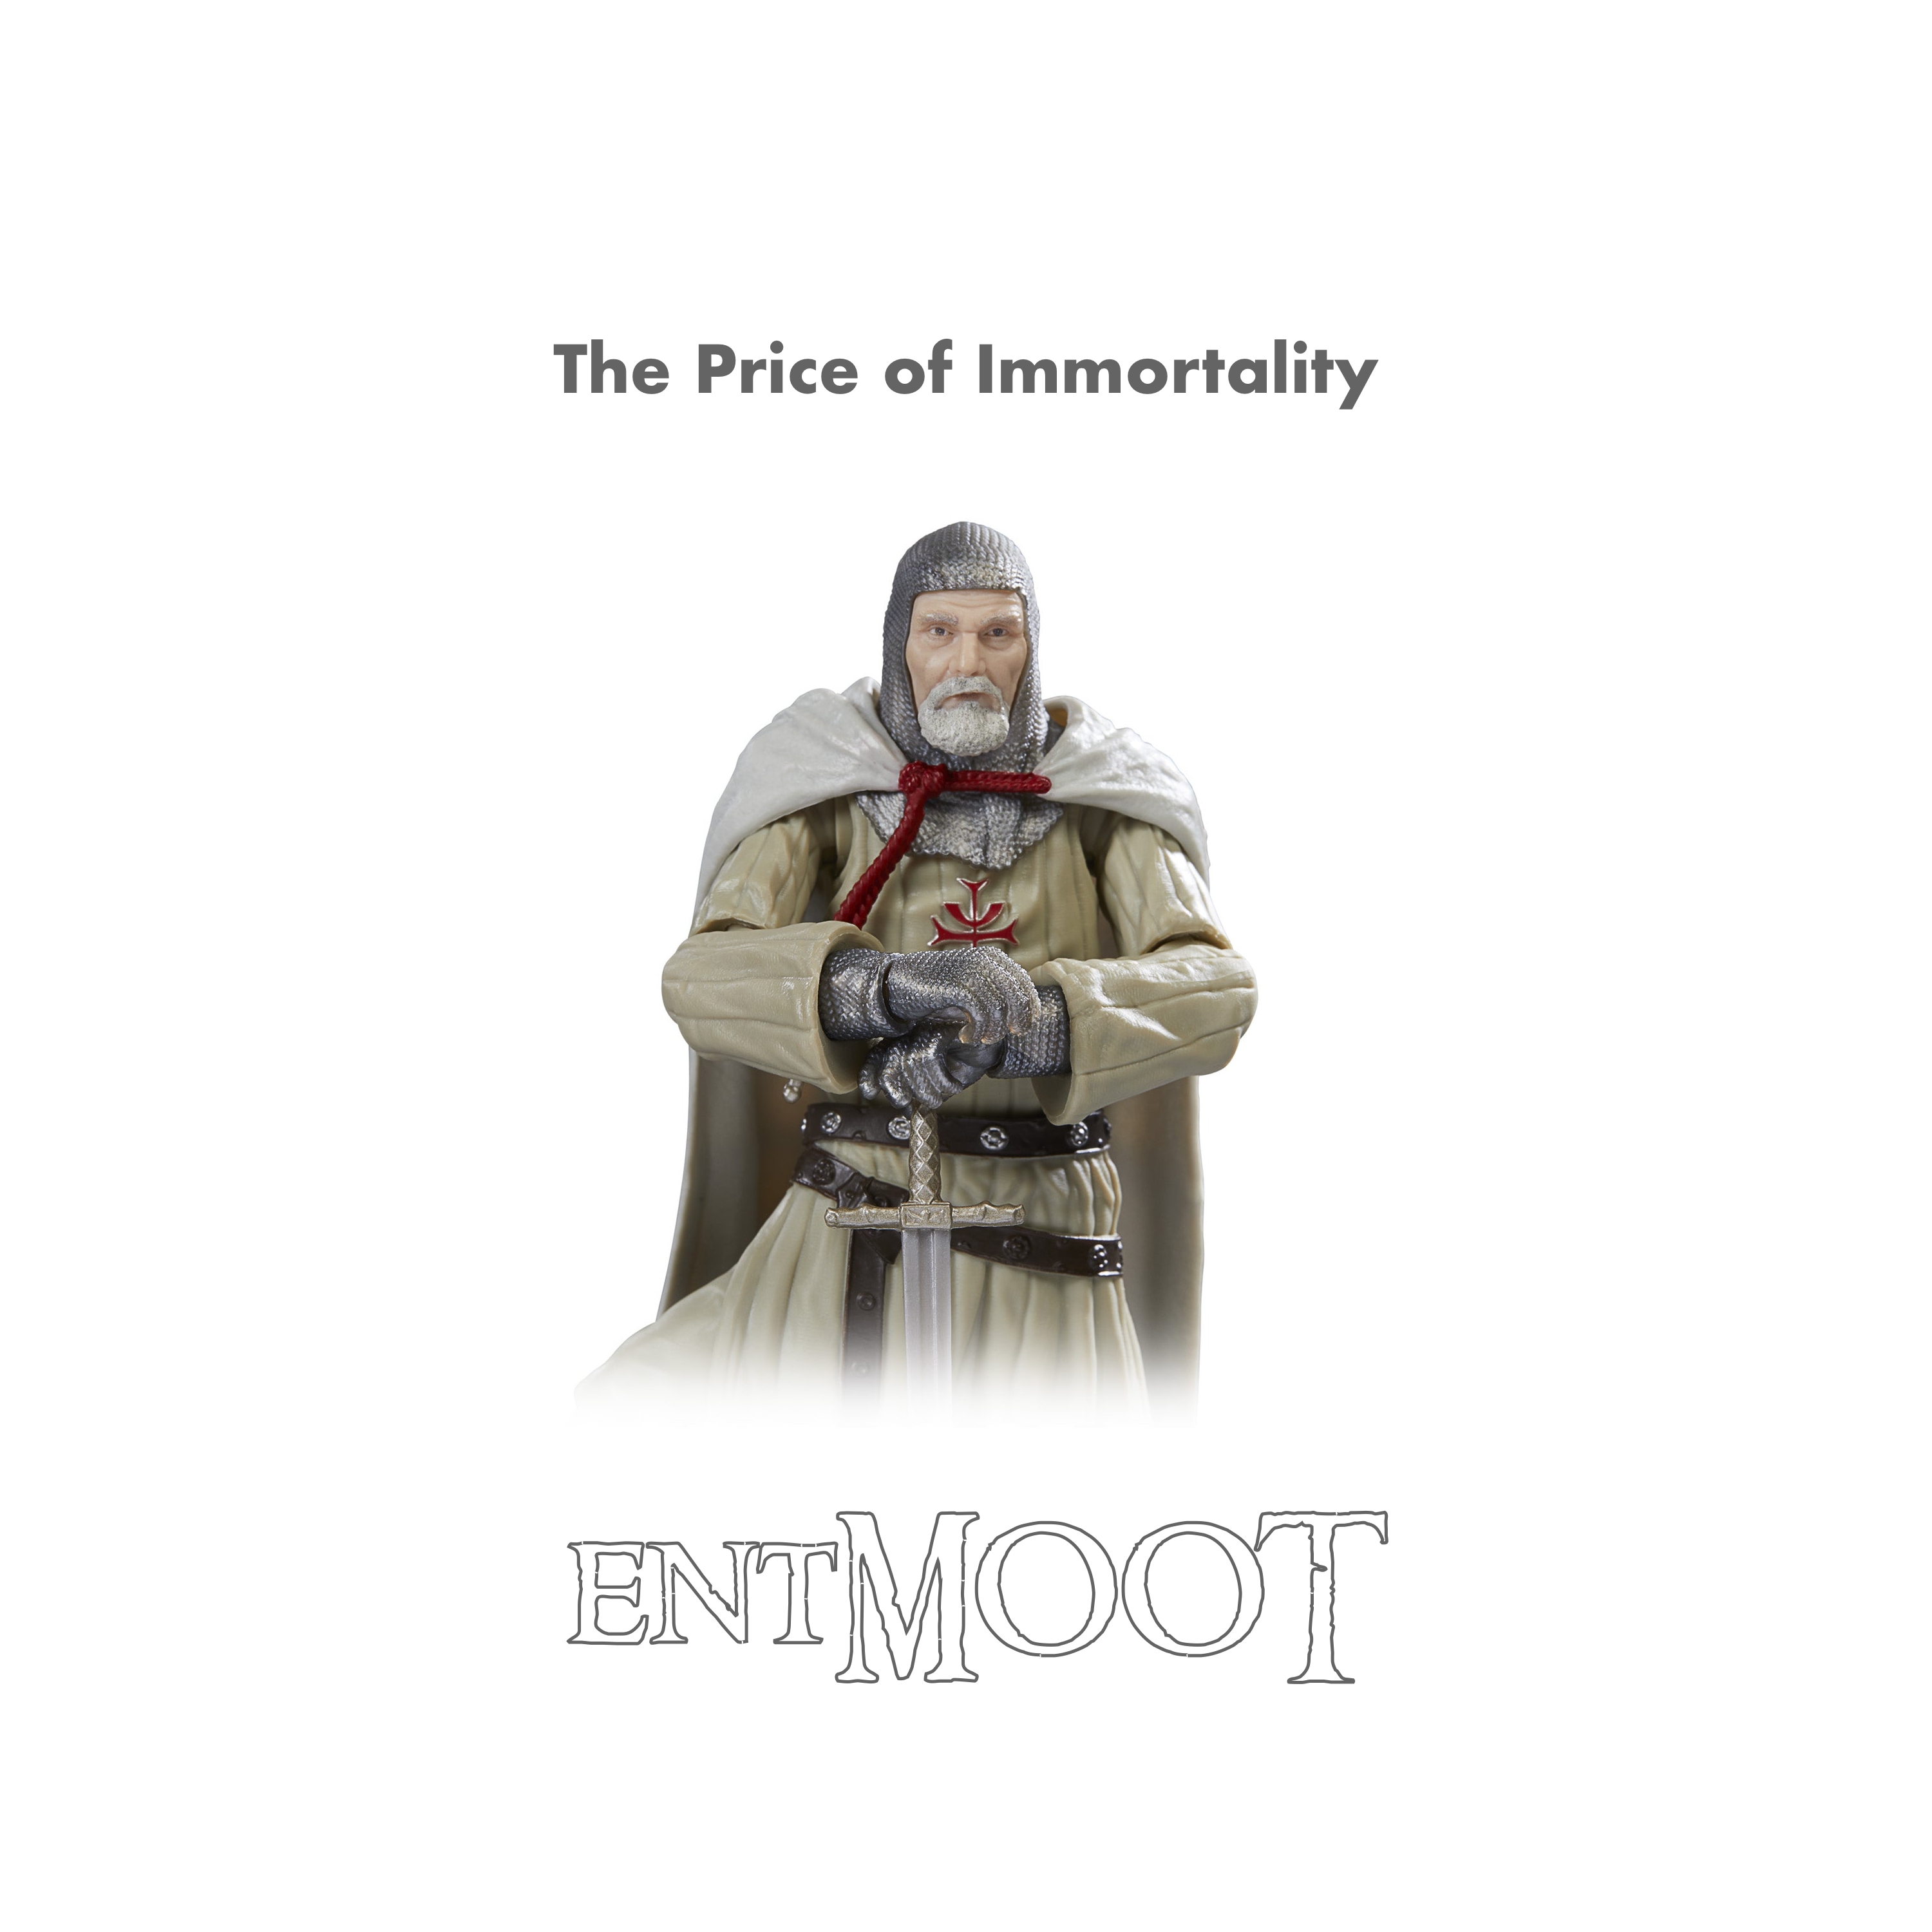 Cover art of The Price of Immortality depicting a toy version of the Grail Knight from Indiana Jones & the Last Crusade